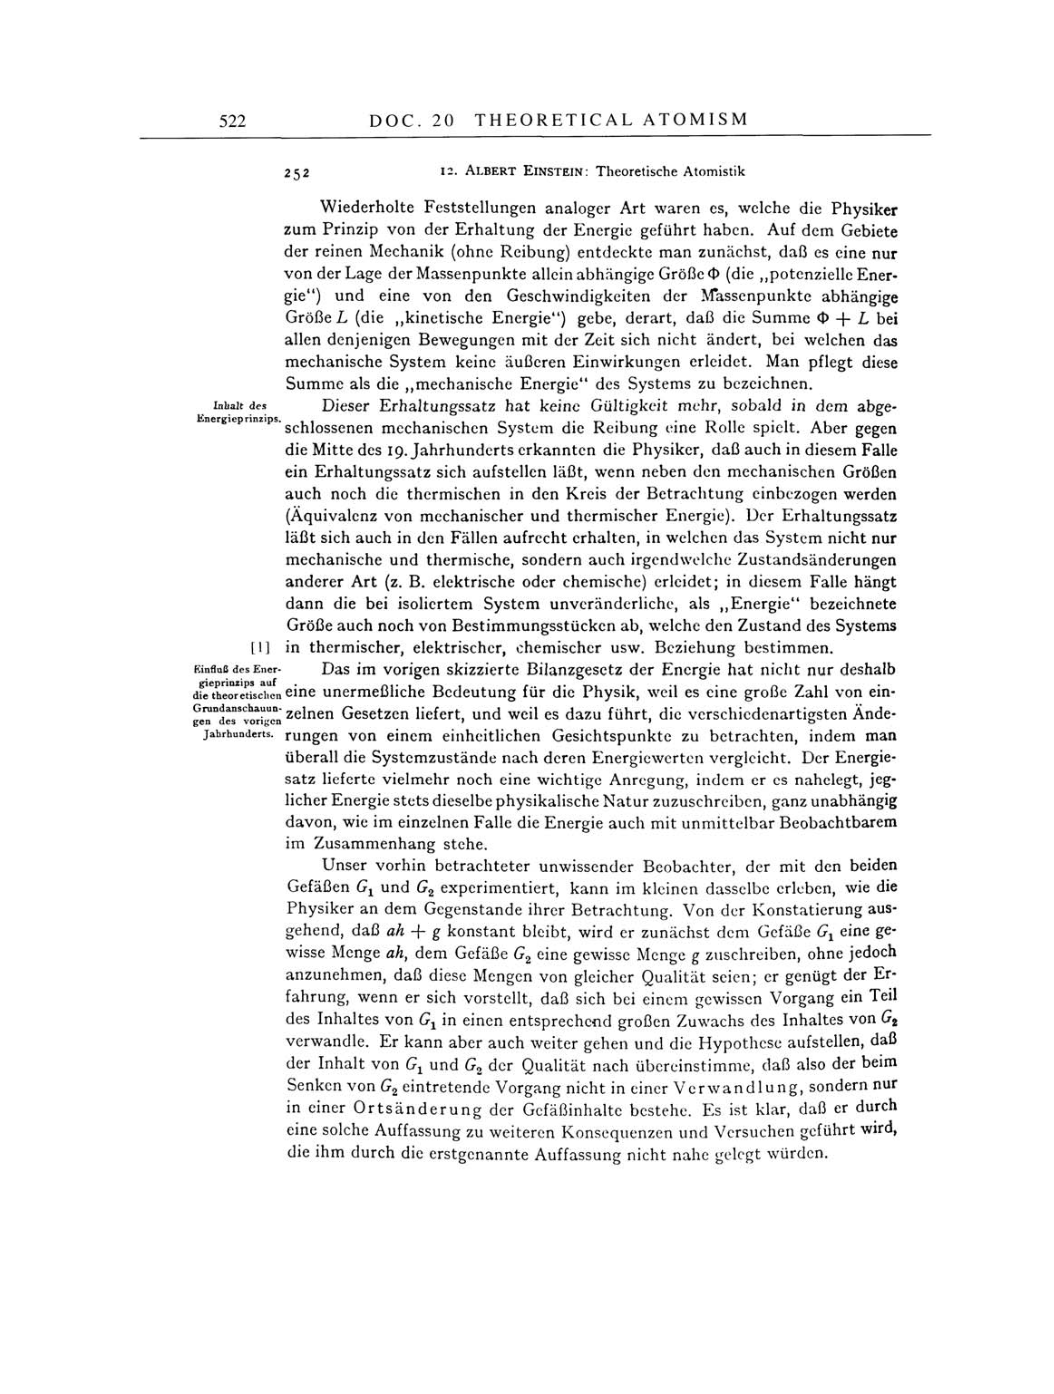 Volume 4: The Swiss Years: Writings 1912-1914 page 522